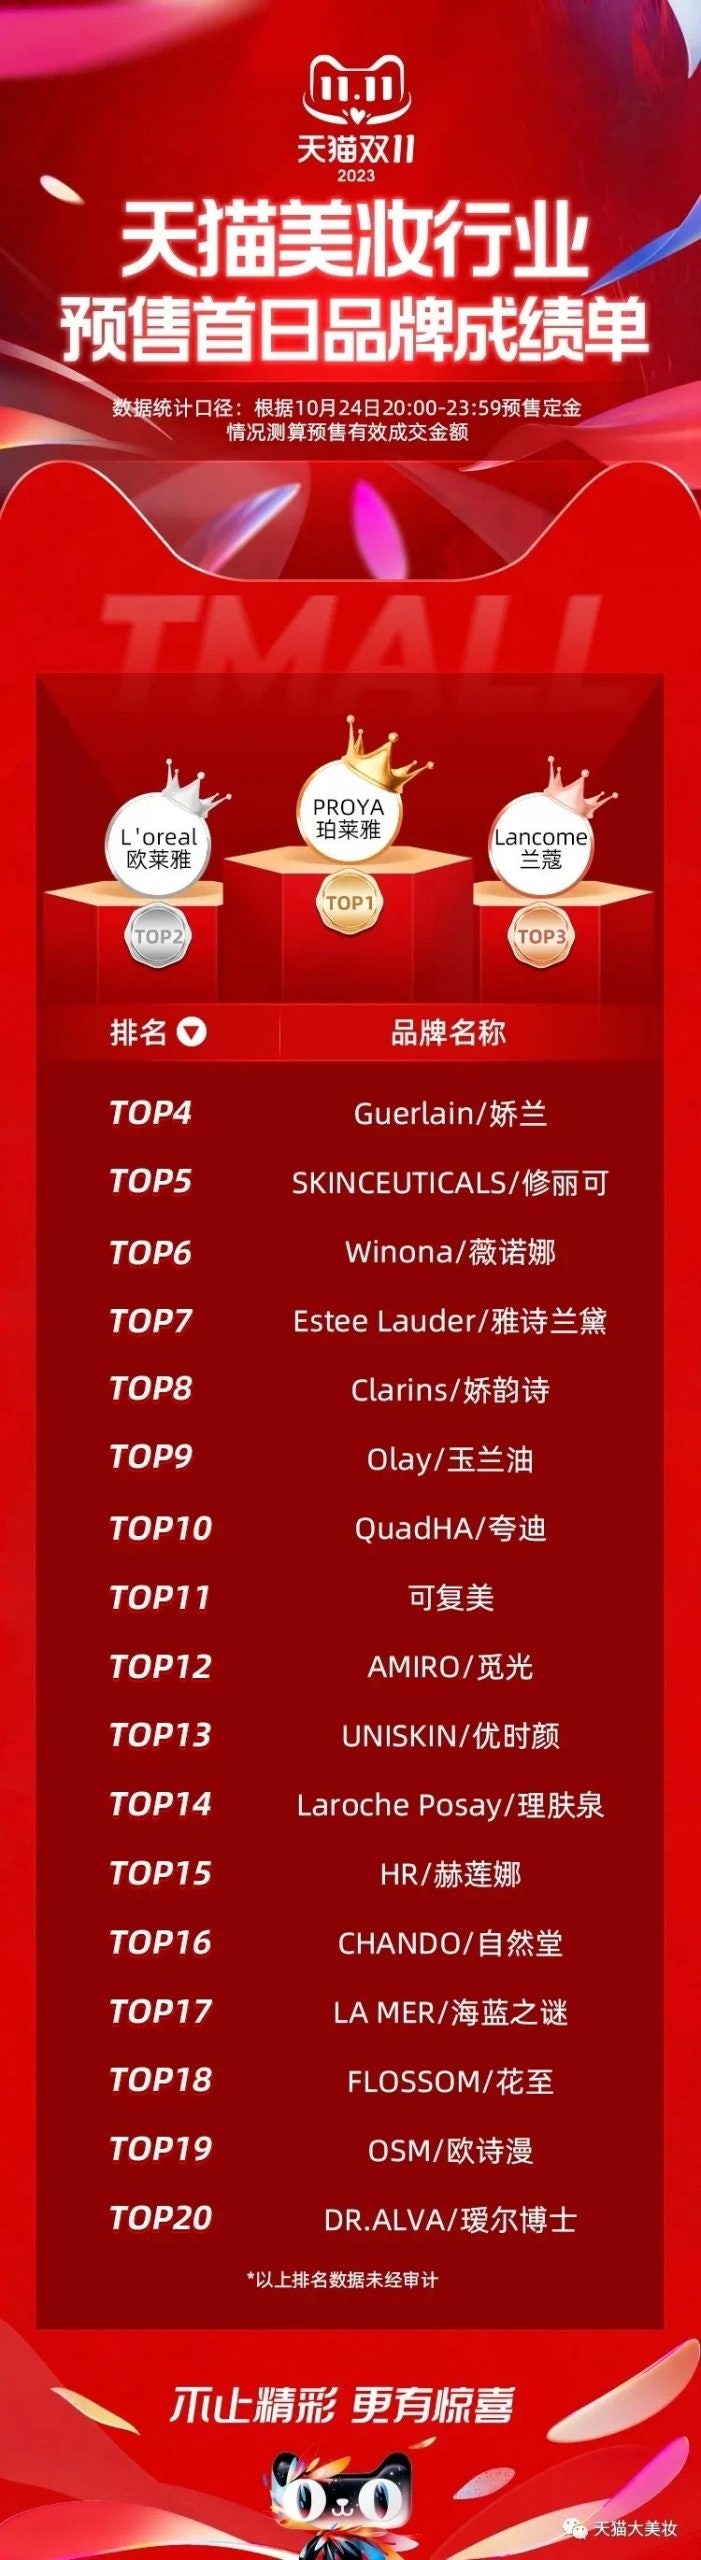 Singles' Day Top 20 beauty brands pre-sales results. Photo: Tmall